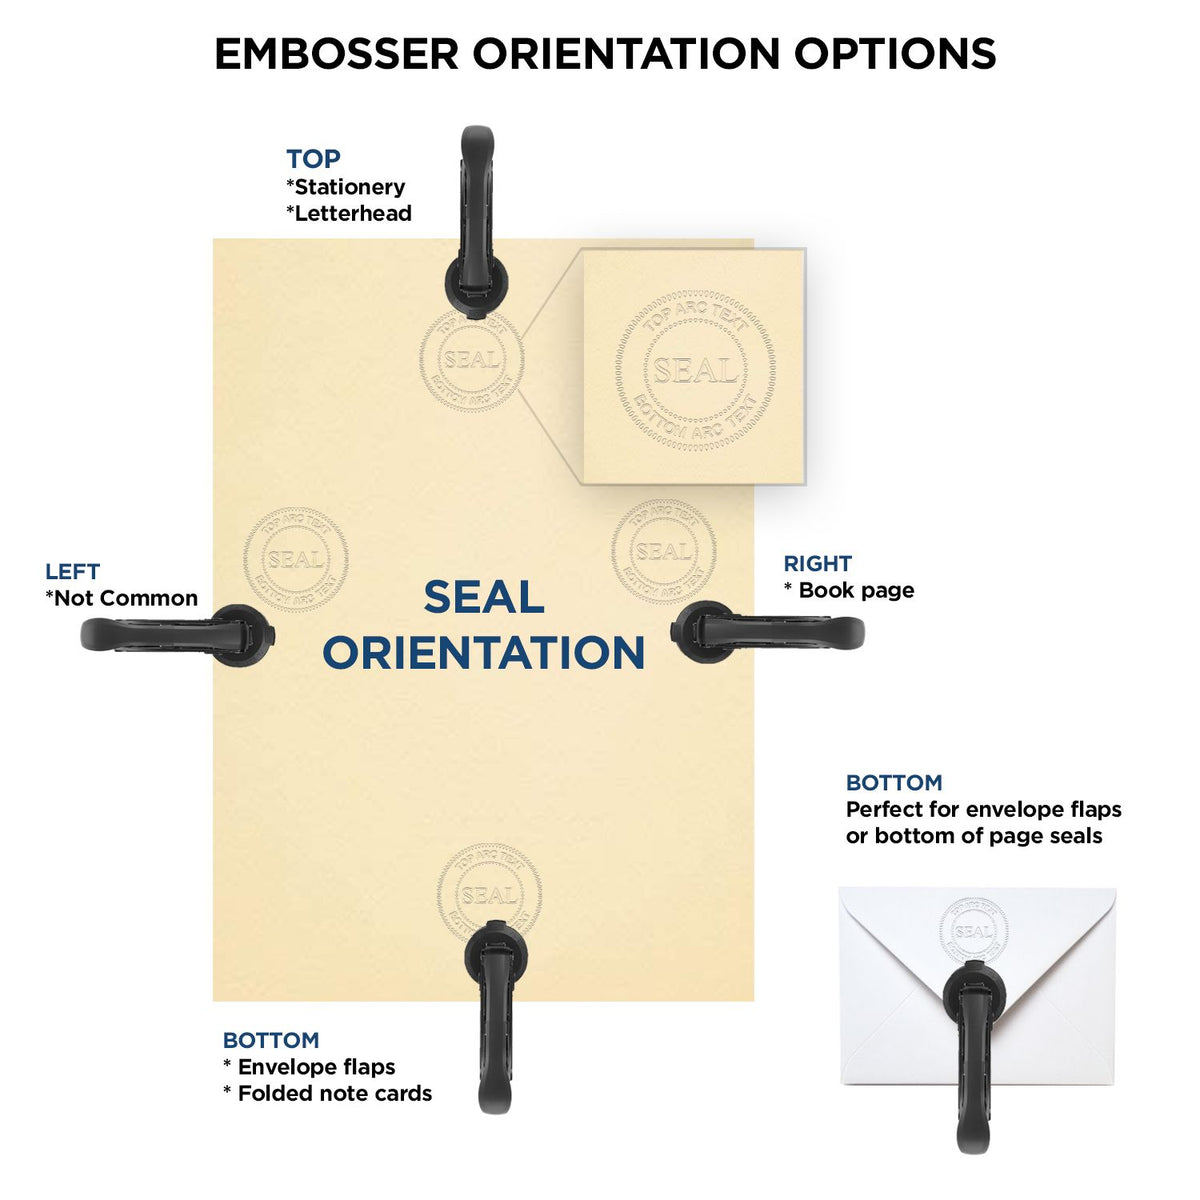 An infographic for the Hybrid North Dakota Land Surveyor Seal showing embosser orientation, this is showing examples of a top, bottom, right and left insert.